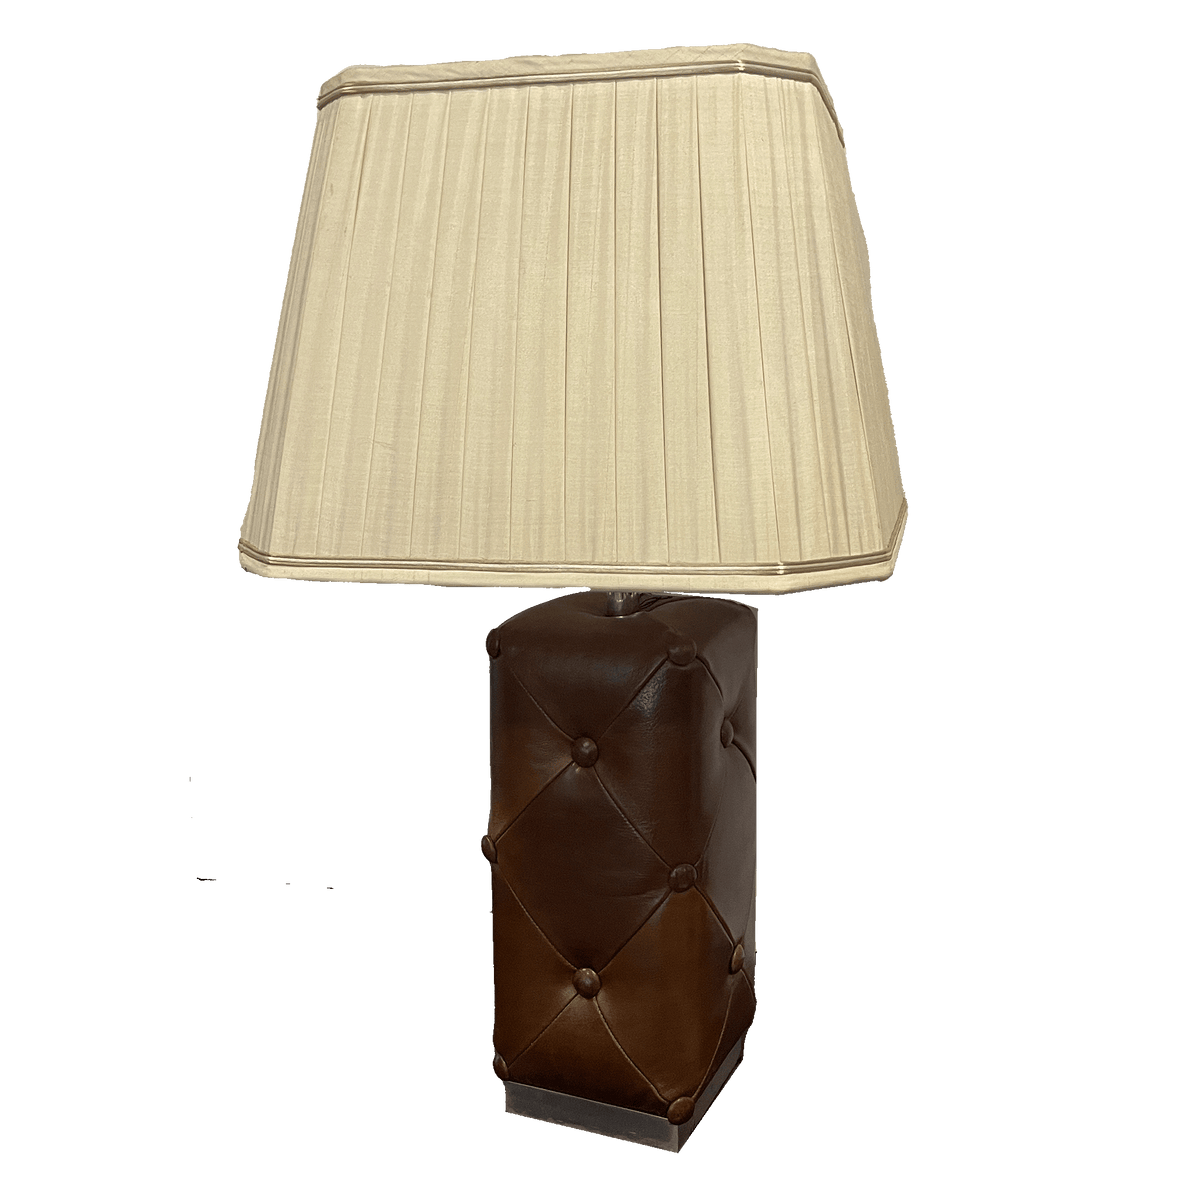 Vintage Tufted Leather Table Lamp